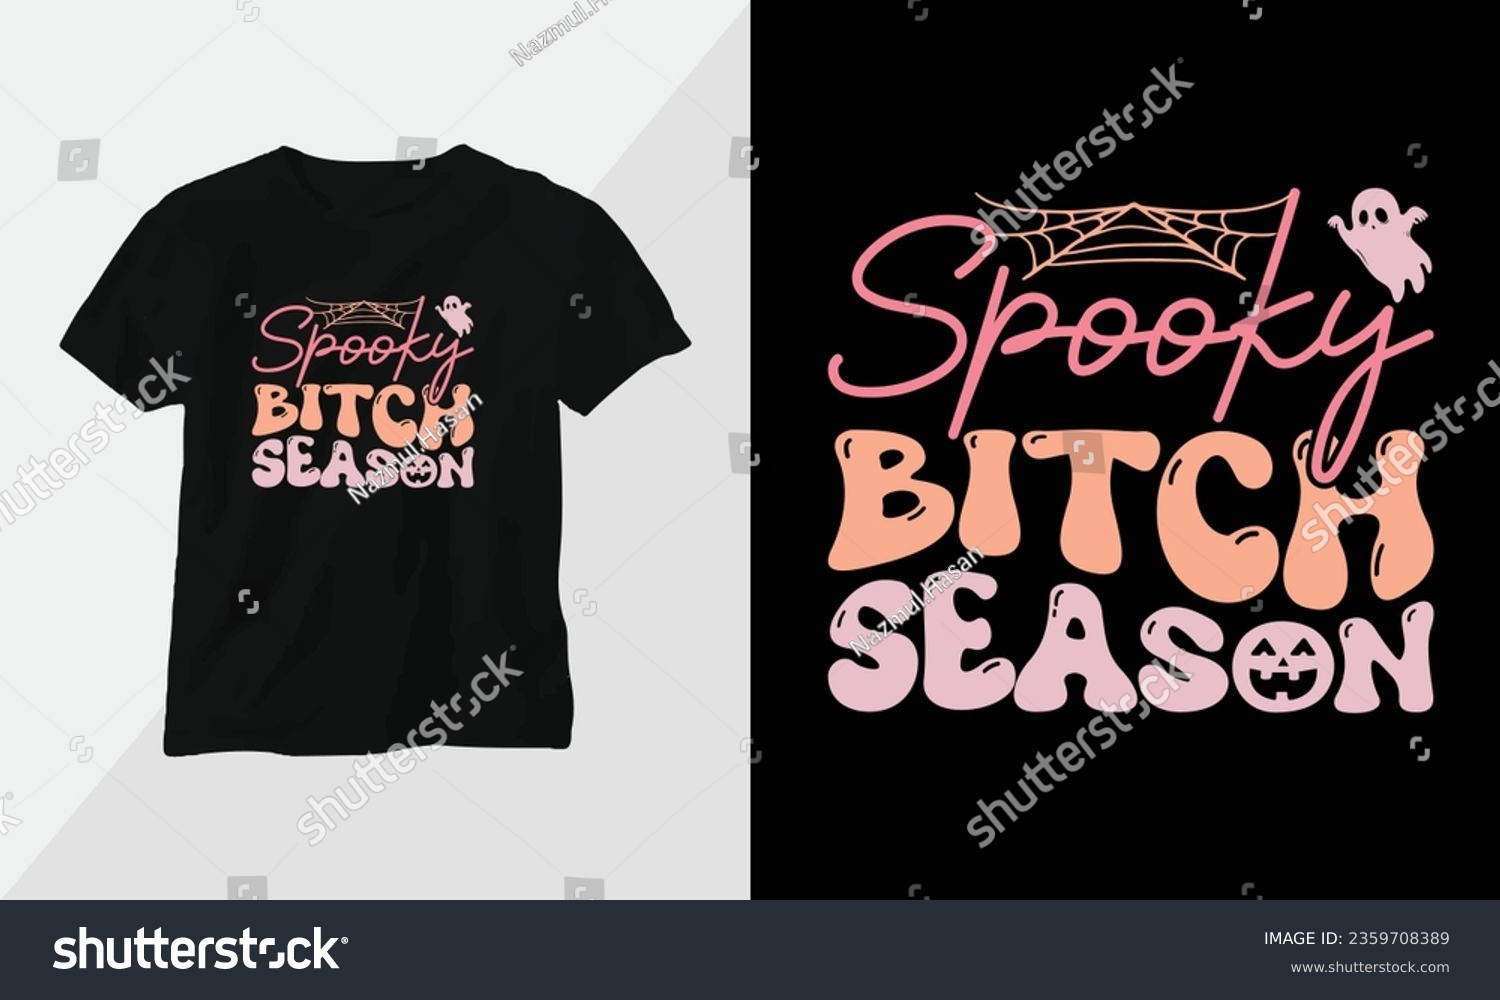 SVG of spooky bitch season - Retro Groovy Inspirational T-shirt Design with retro style svg